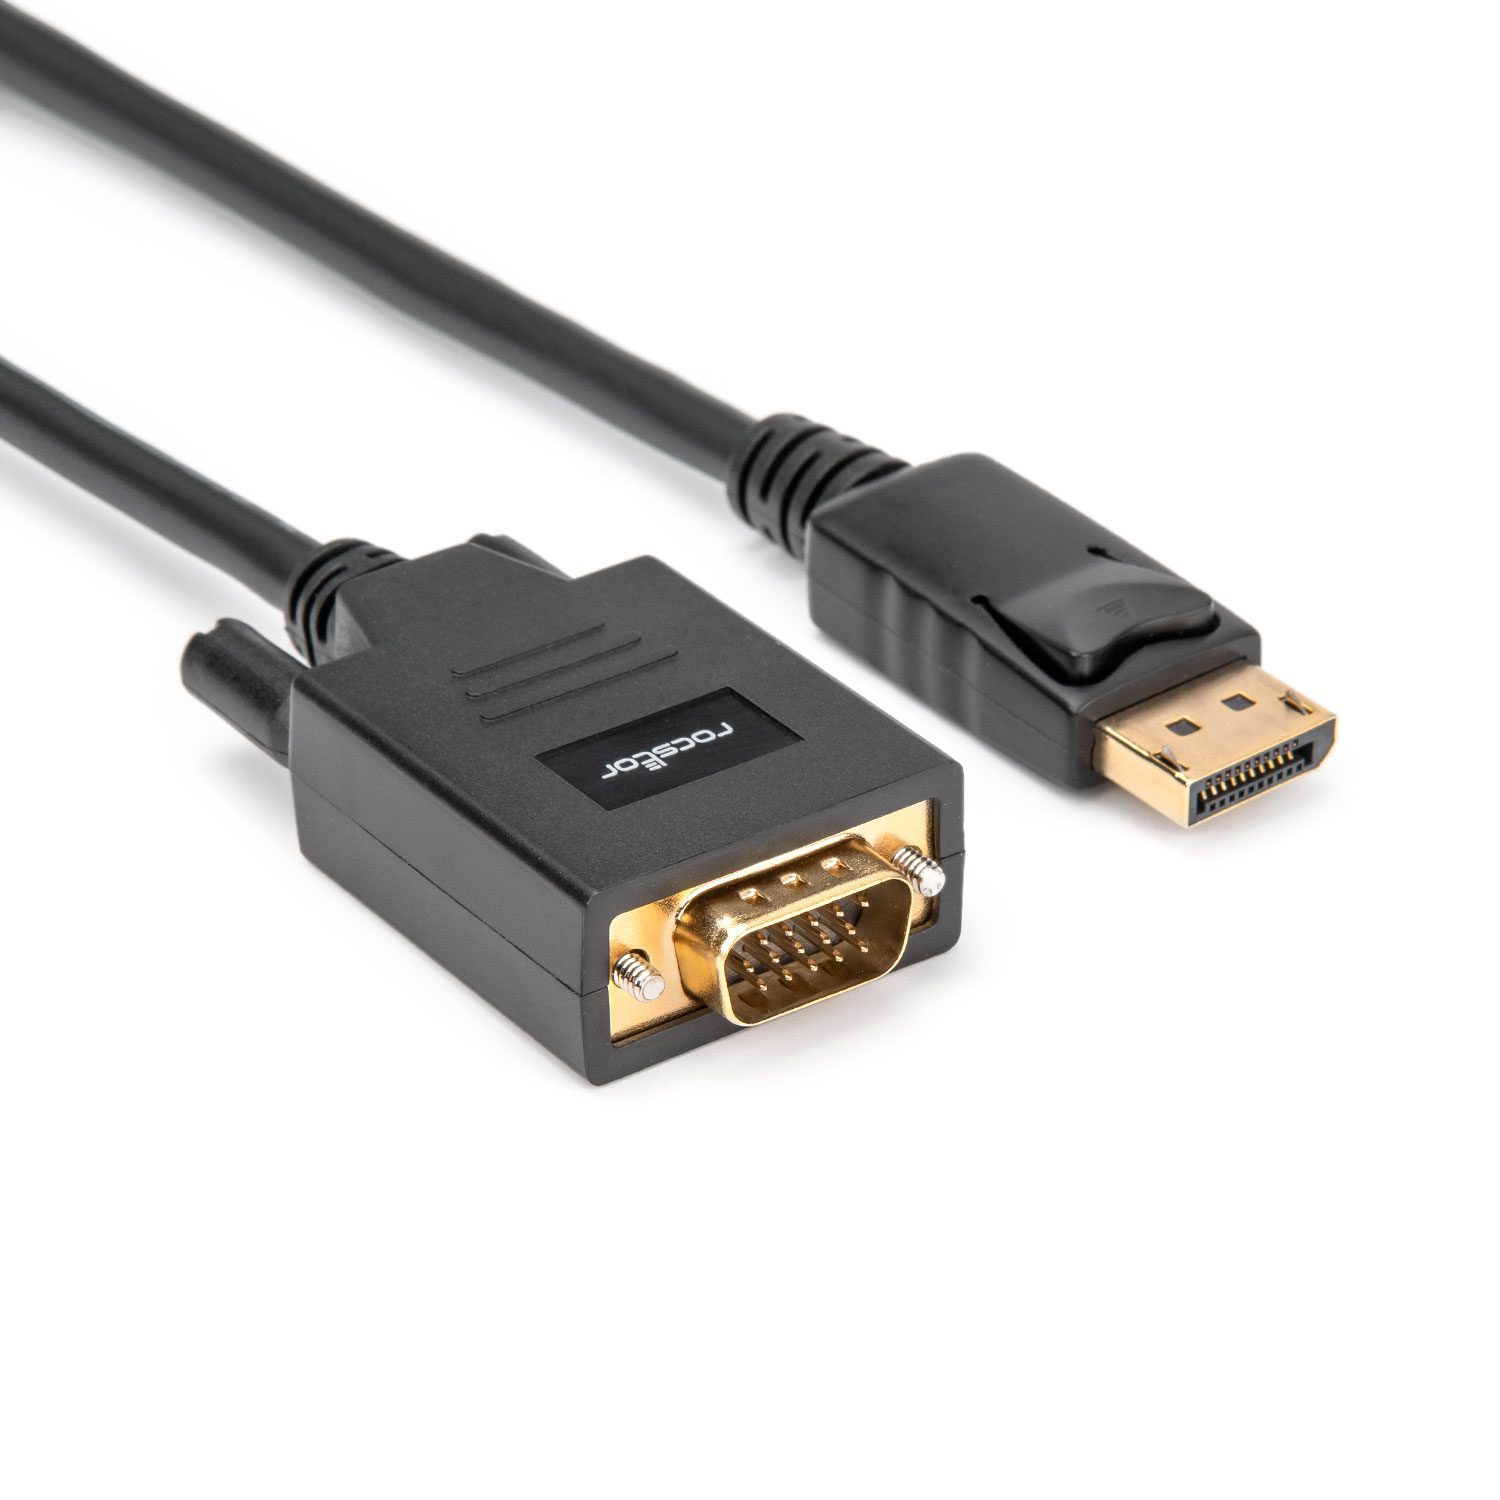 DisplayPort to VGA Cable Adapter Converter -M/M